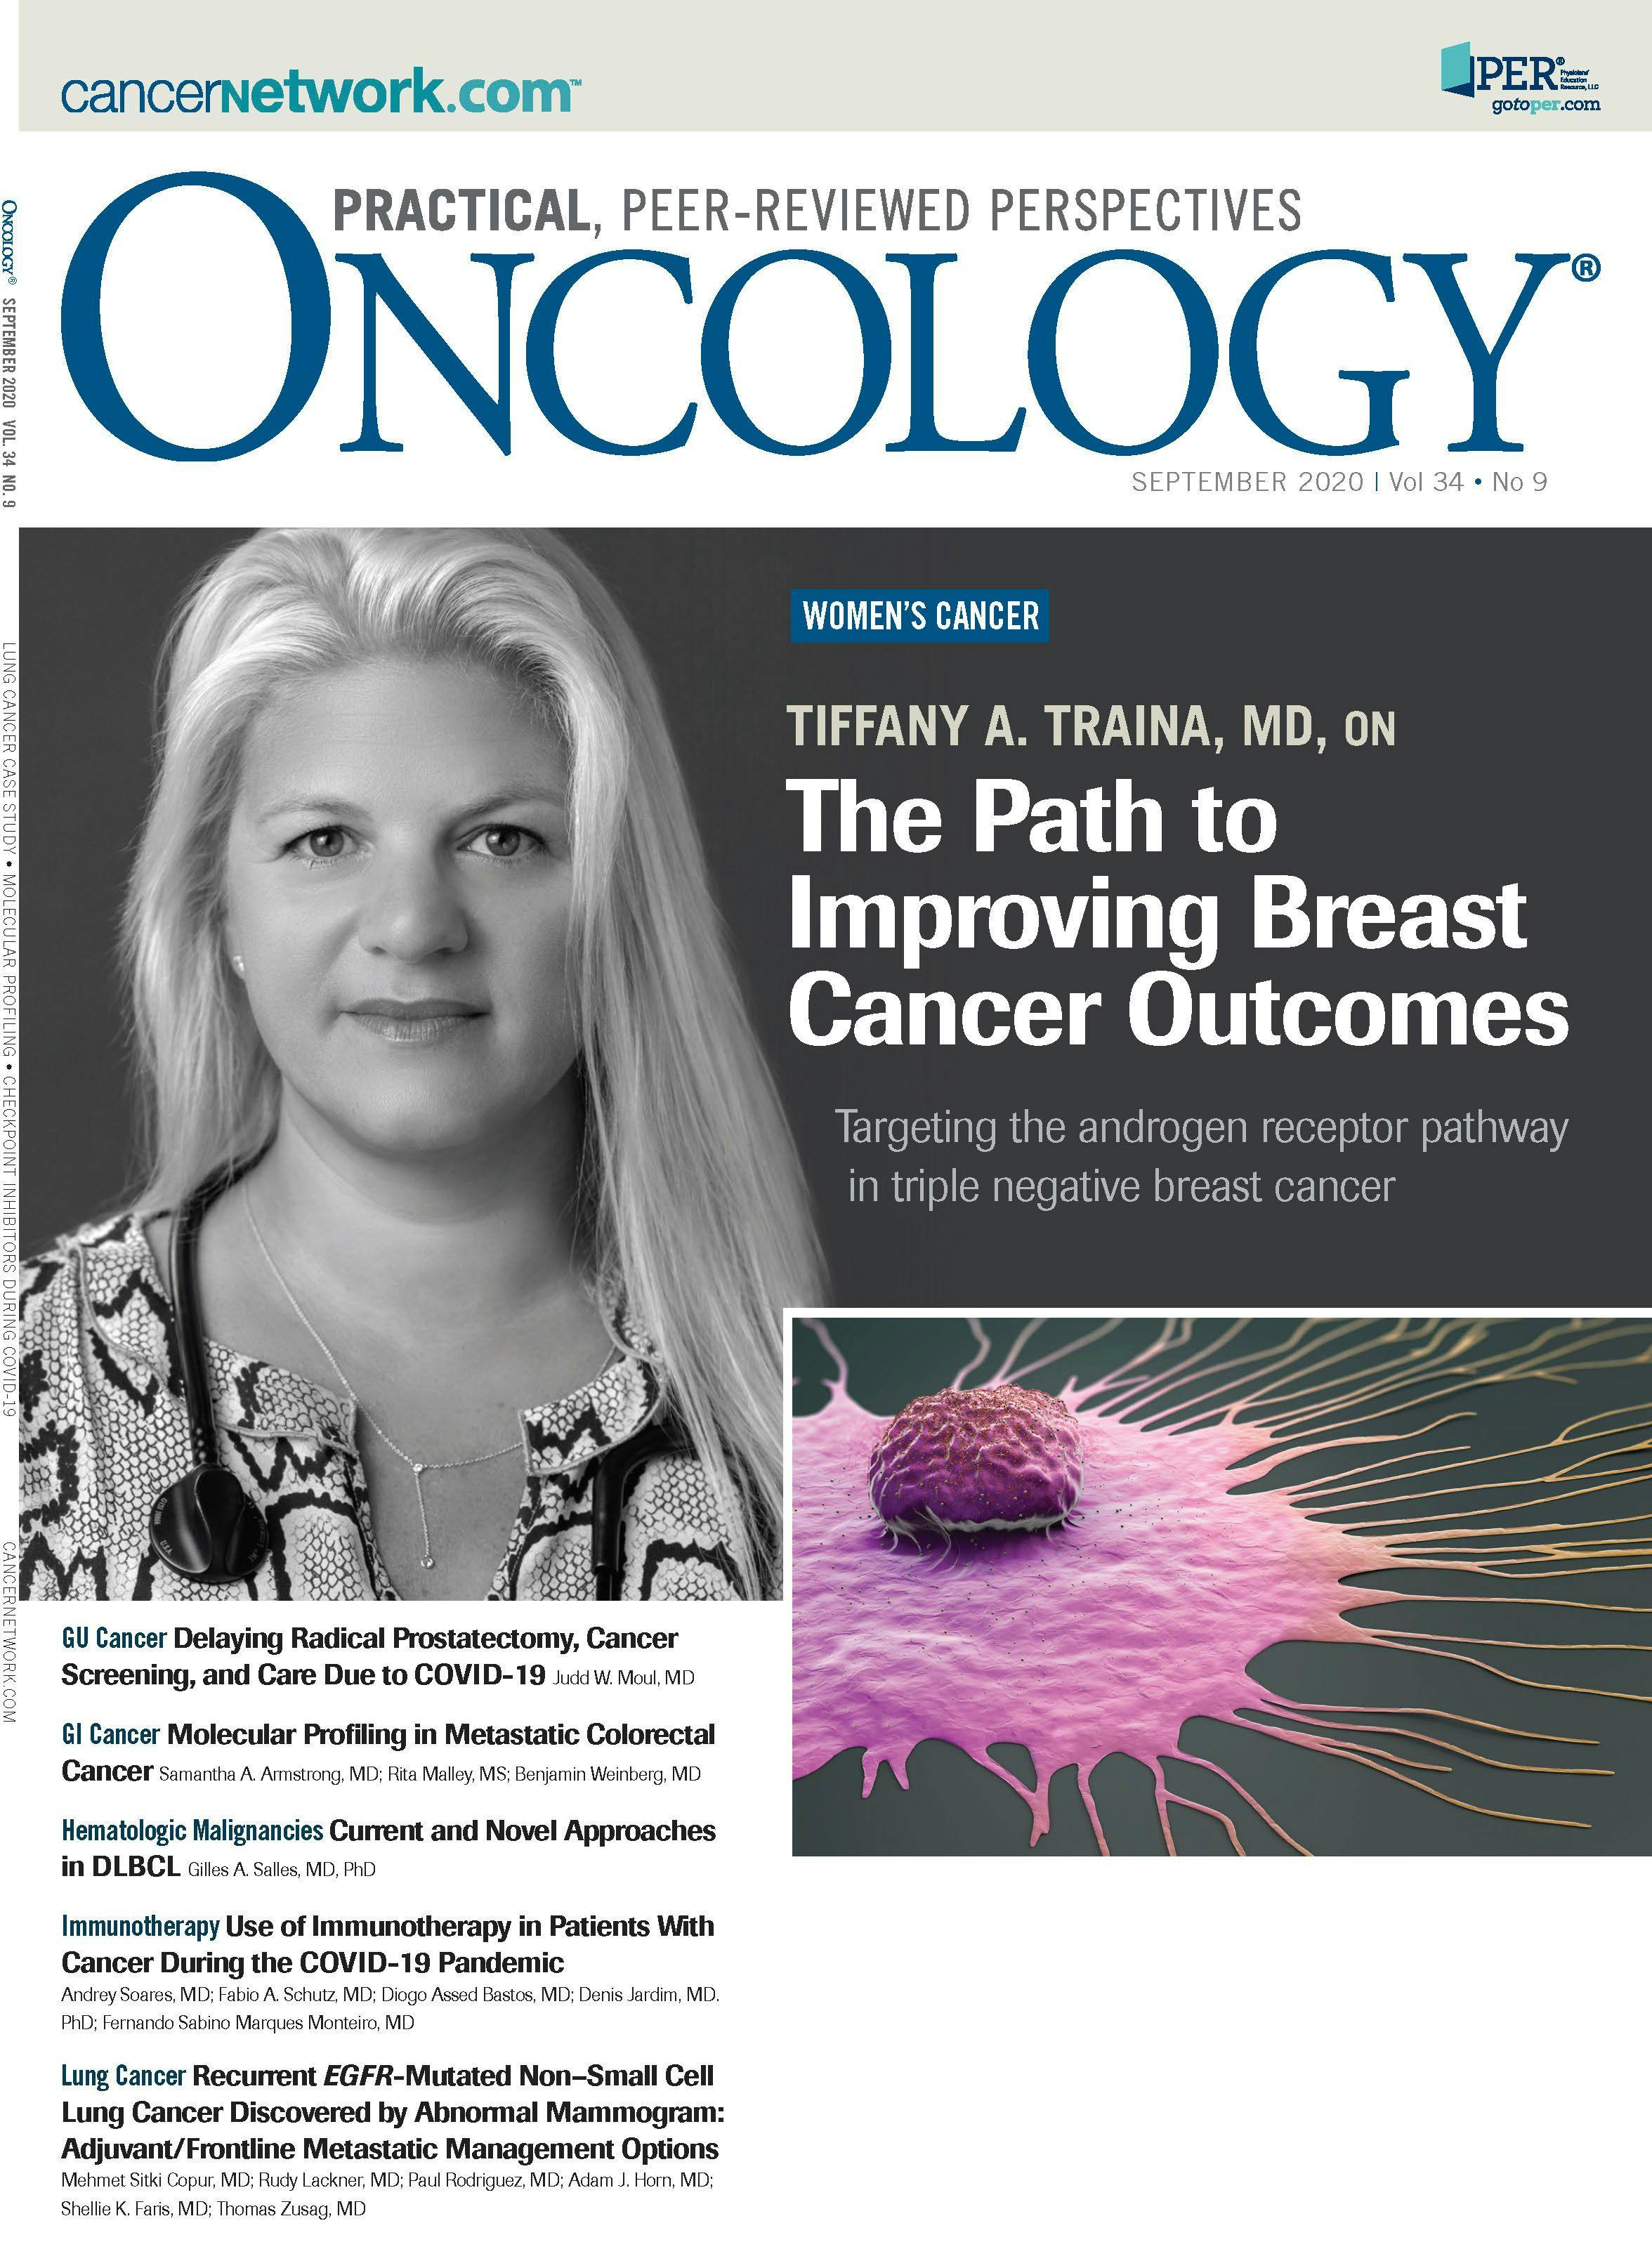 ONCOLOGY Vol 34 Issue 9